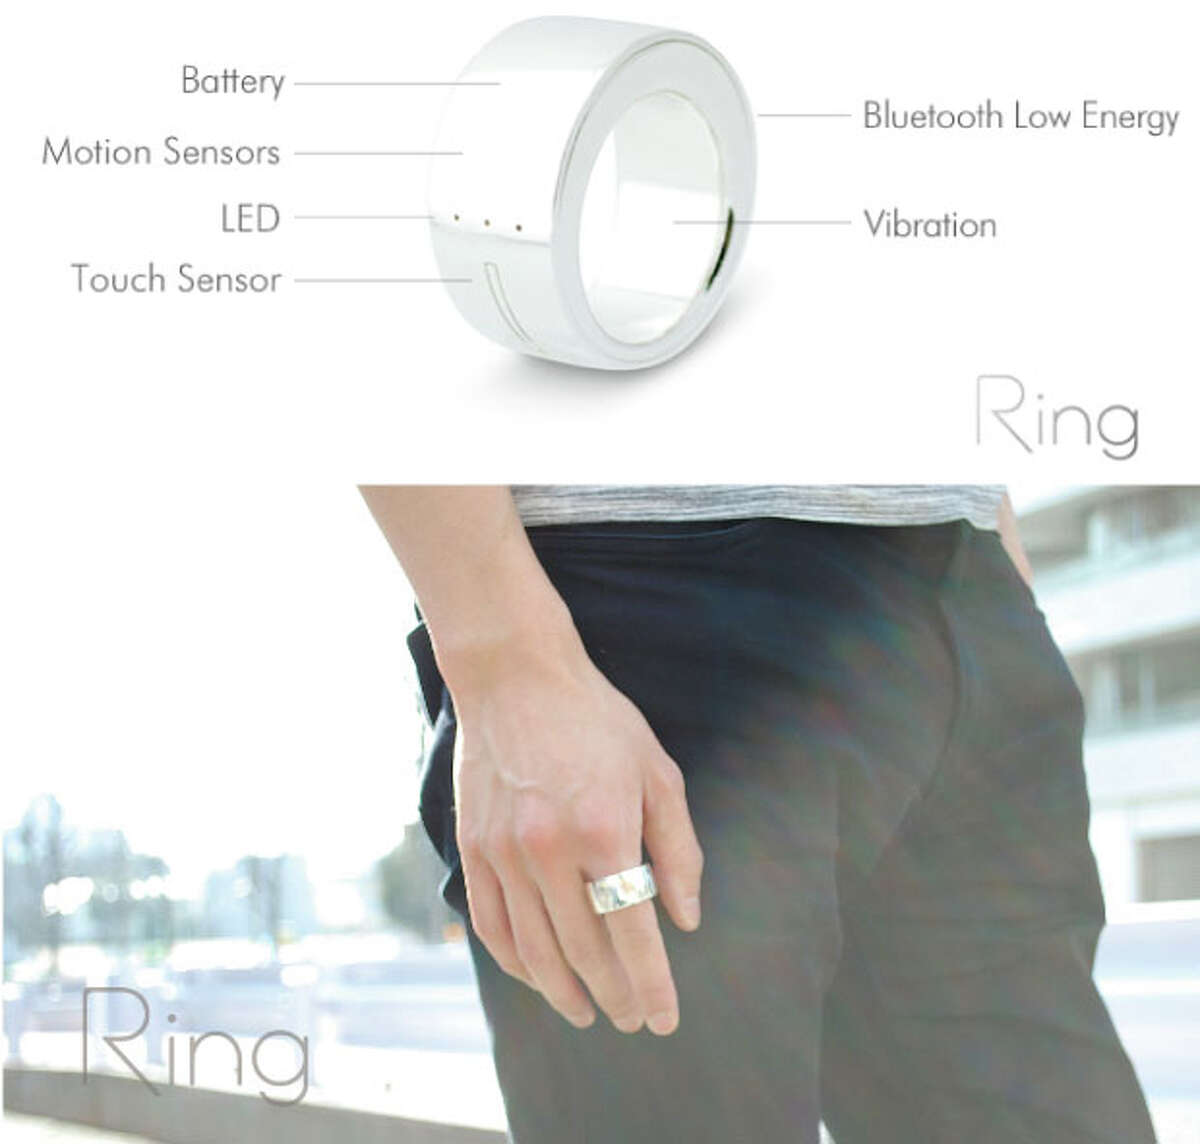 Ring creates shortcuts to let you control everything with simple finger movements. Features: Gesturing of letters in the mid-air are recognized as texts. Built-in LED and vibration can send you alerts. Control home appliances by connecting them through the ring or a hub device. Pay your bills with one gesture through payment information transmission. Kickstarter page here.